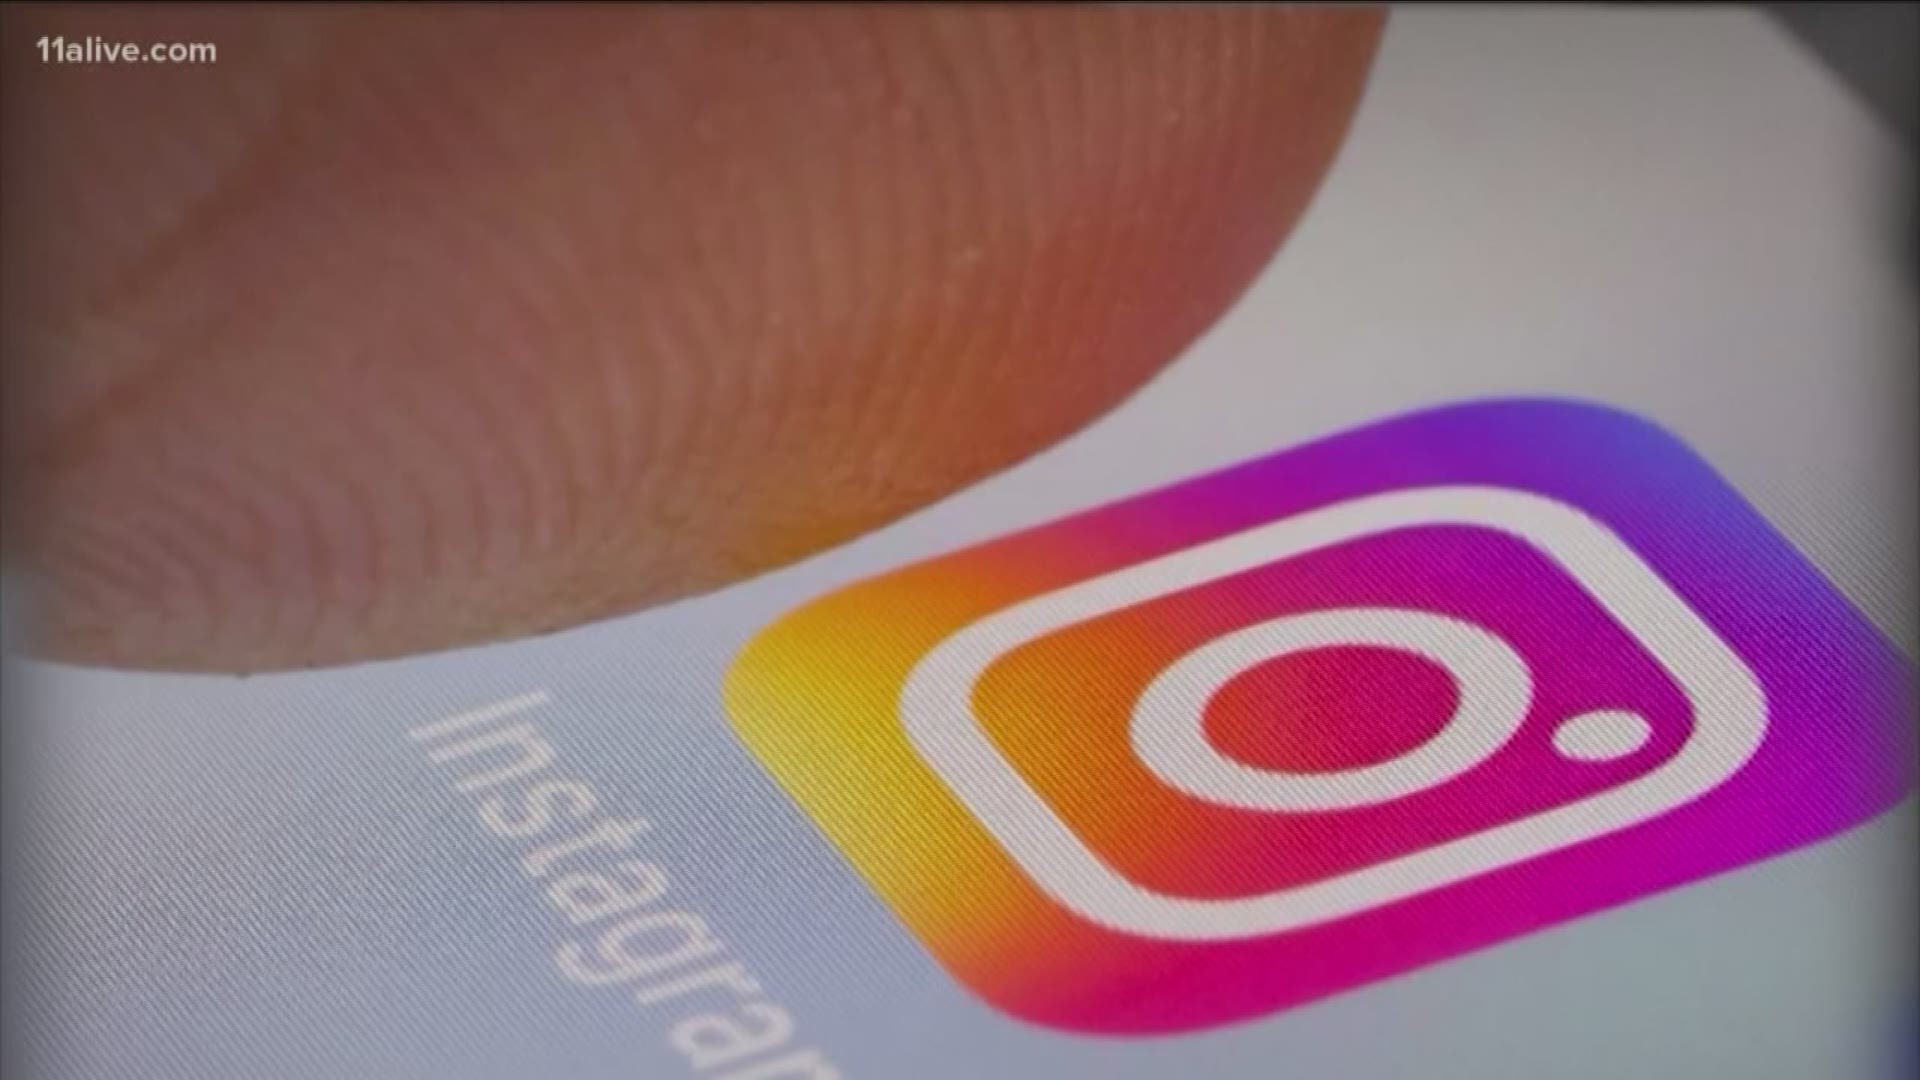 An IG post claiming your content will become public and can be used anywhere, including court, is making the rounds, but is it true? Chris Rogers verifies.